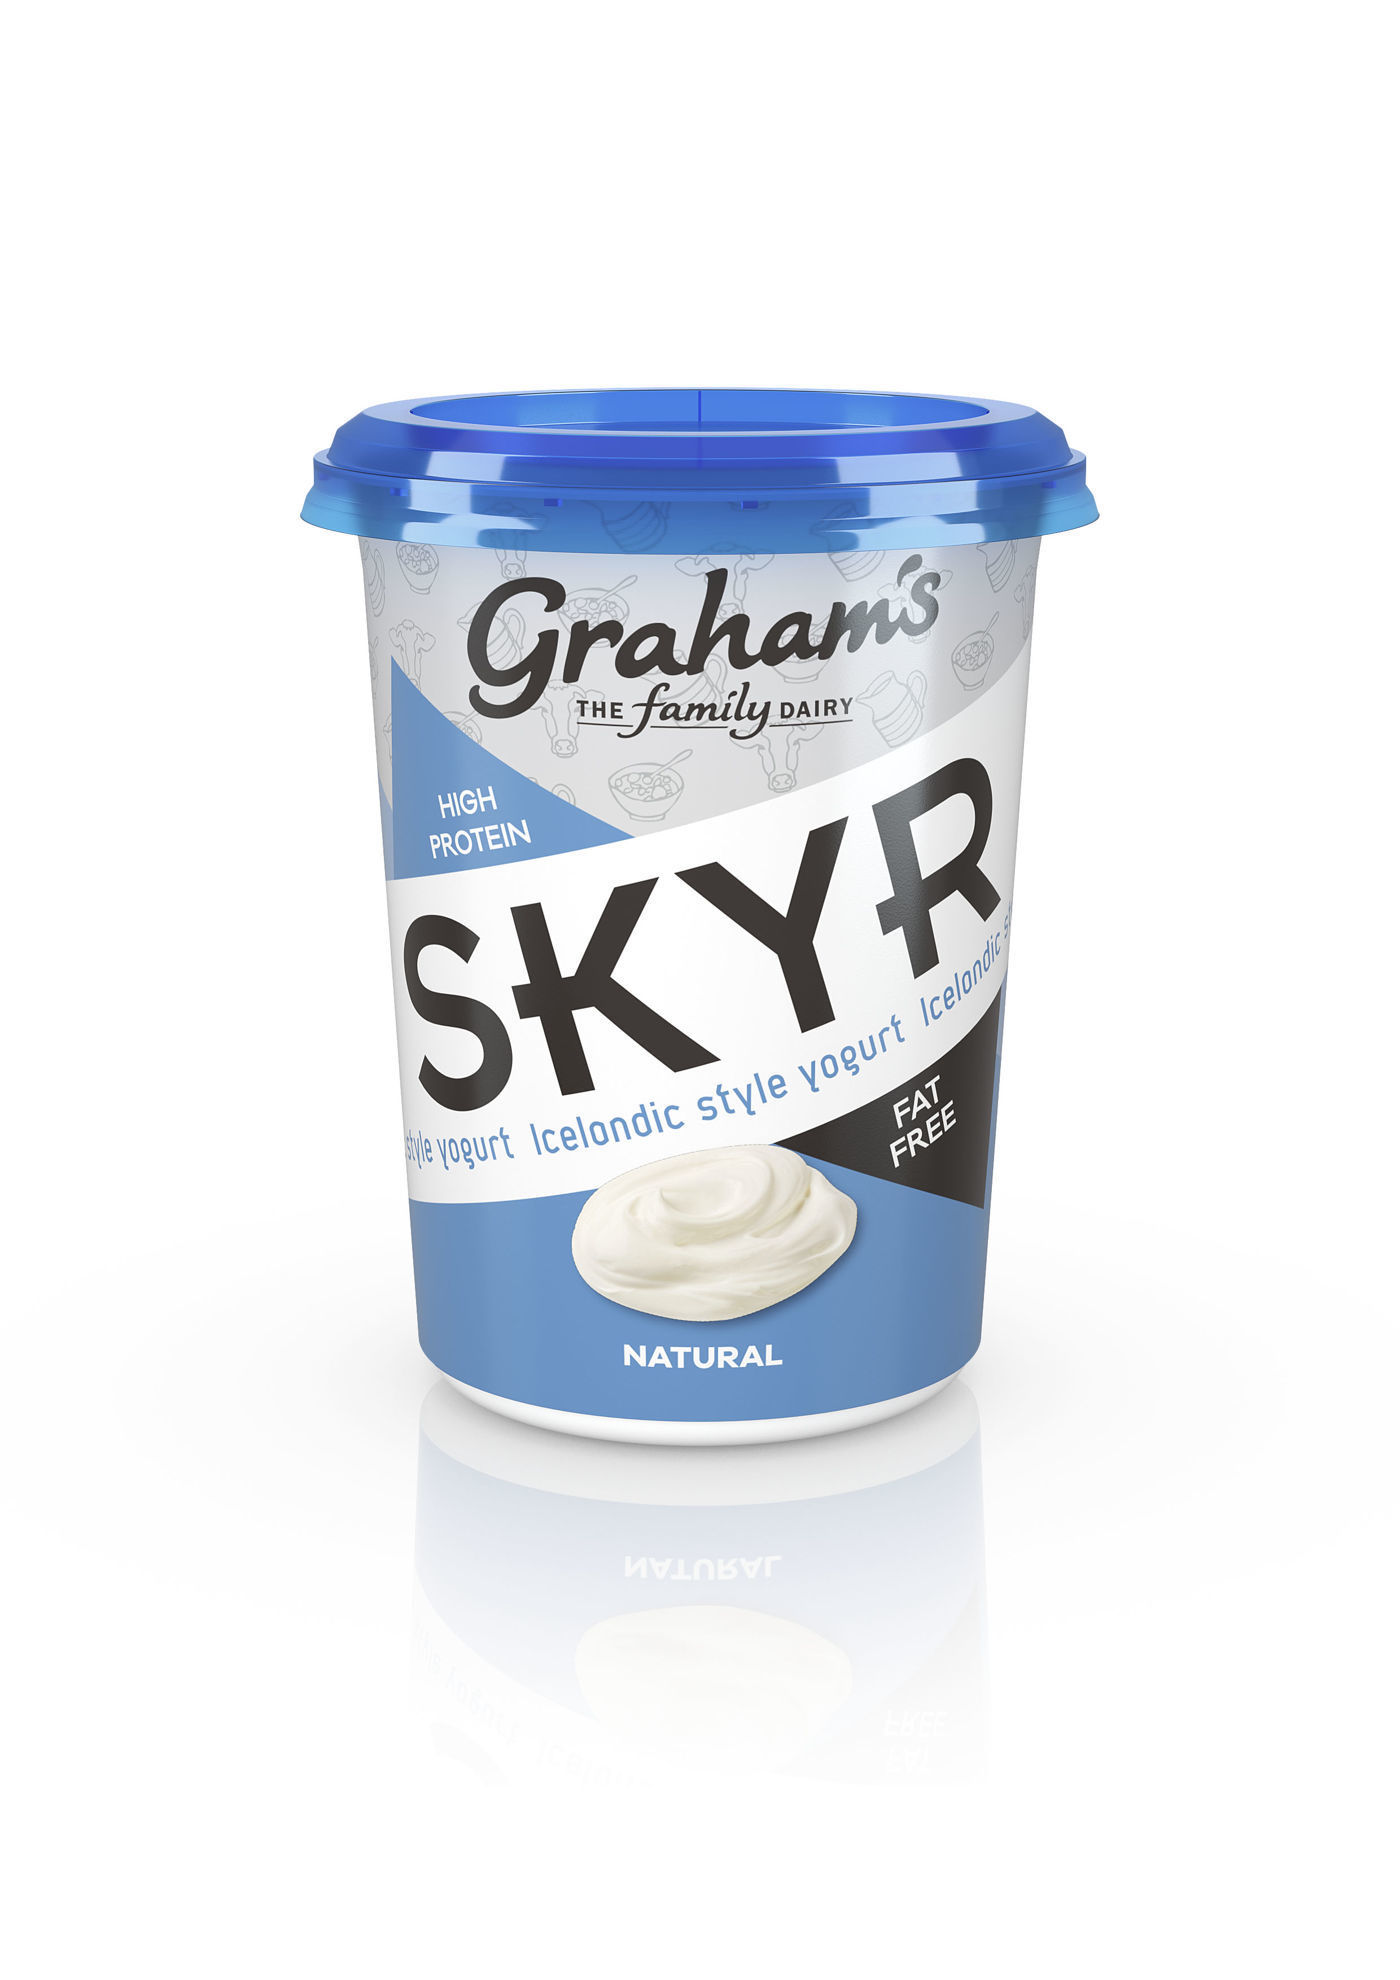 Our Yogurt - find out more about our delicious Scottish yogurt.